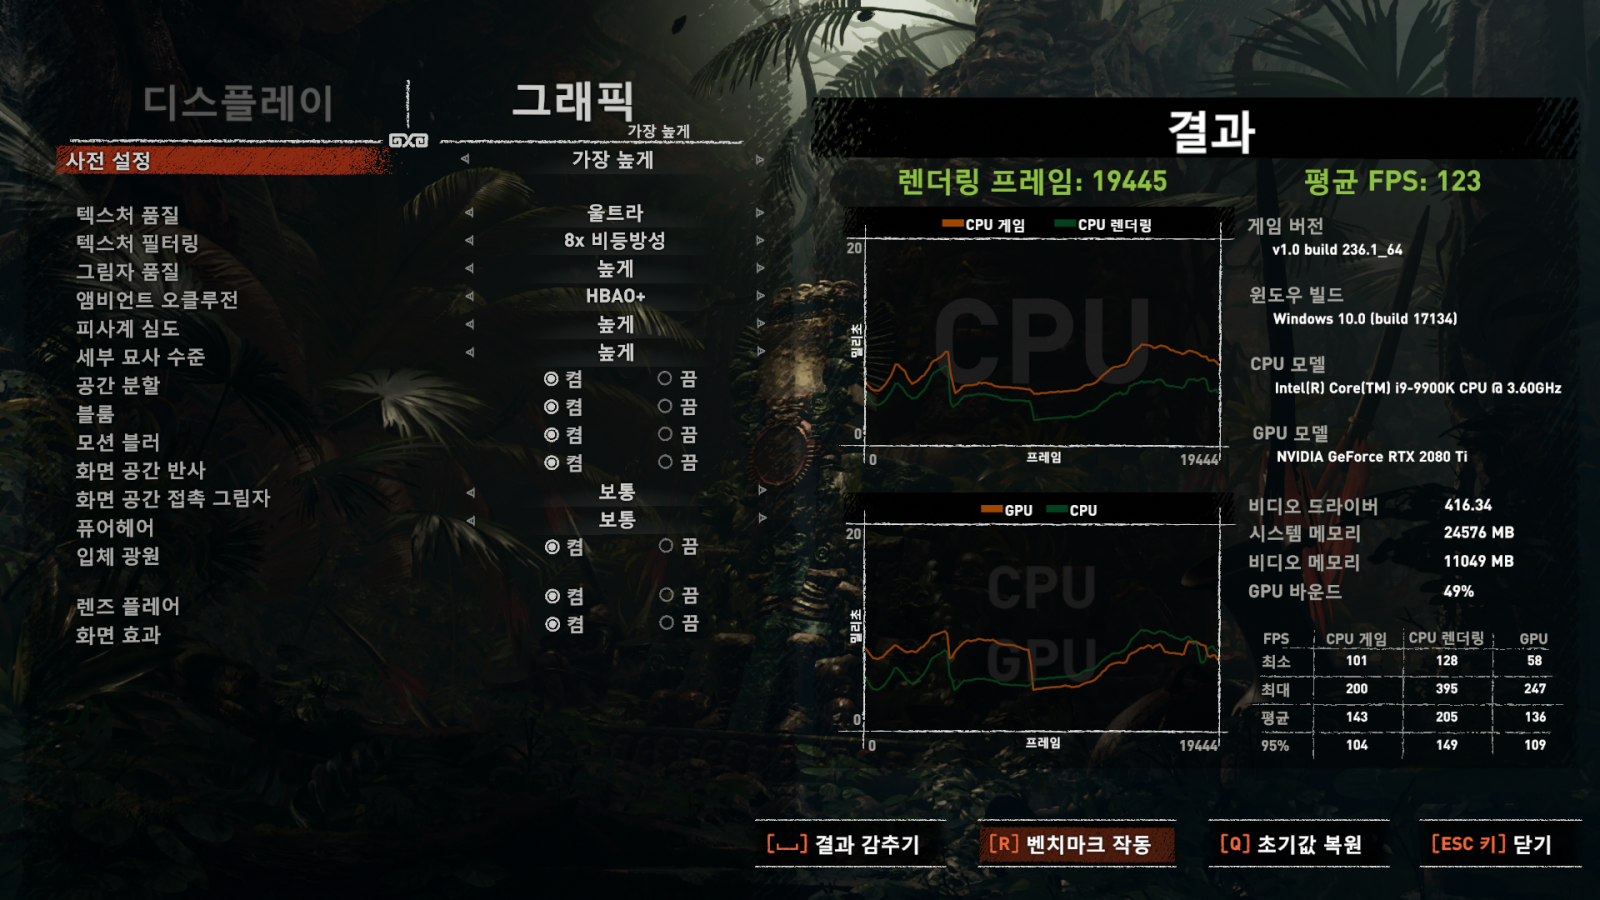 Shadow of the Tomb Raider v1.0 build 236.1_64 2018-11-05 오후 10_13_19.png